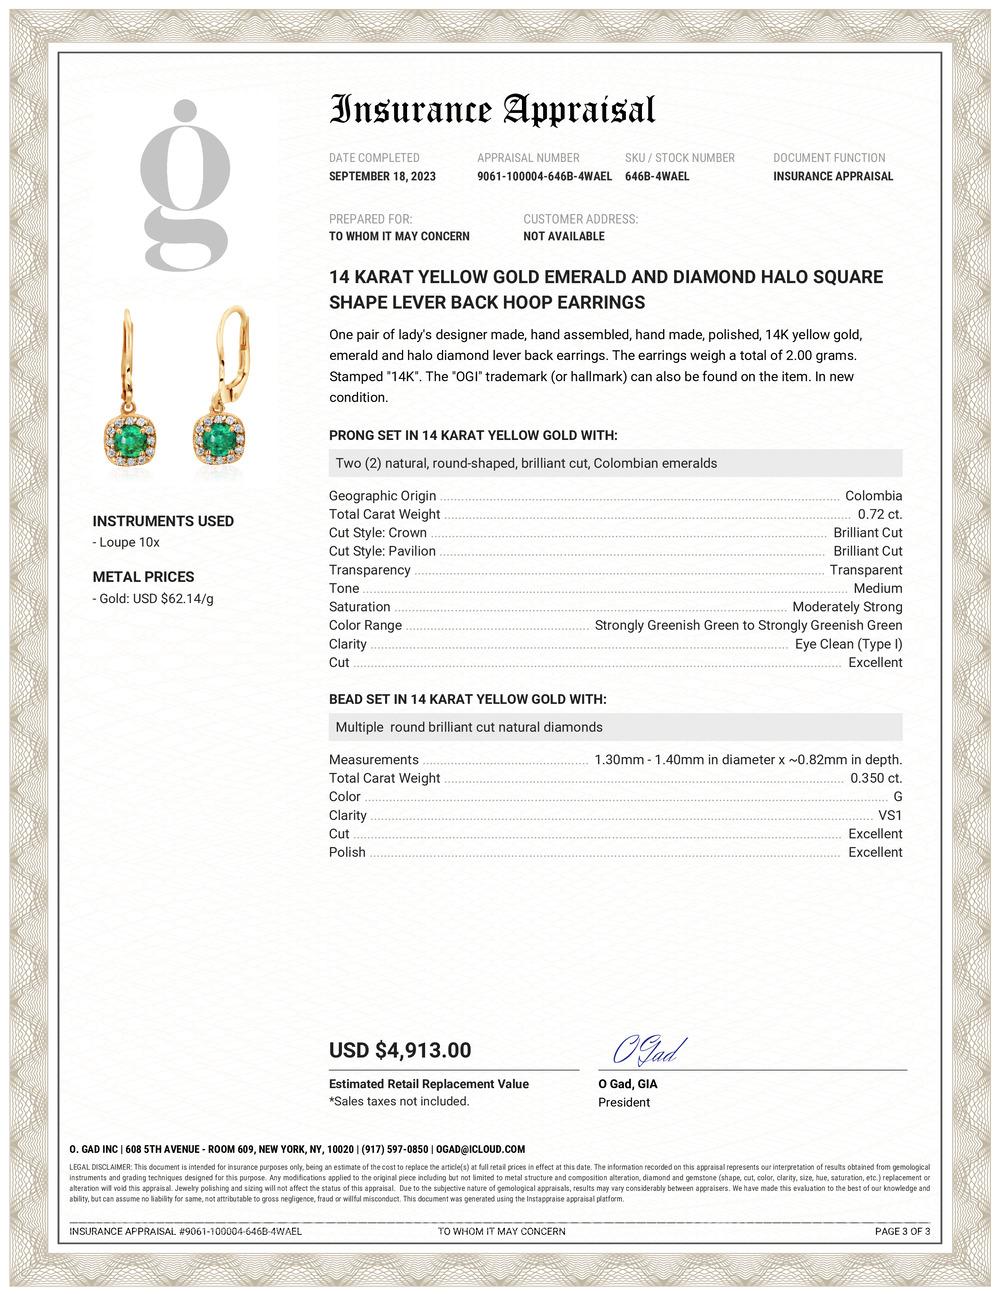 Featuring Diamond and Emerald weighing 0.75 carat, 14 karat yellow Gold Halo LeverBack Hoop Earrings are a type of jewelry that features diamonds and emeralds set in a halo design around a hoop earring. The earrings are crafted using high-quality 14